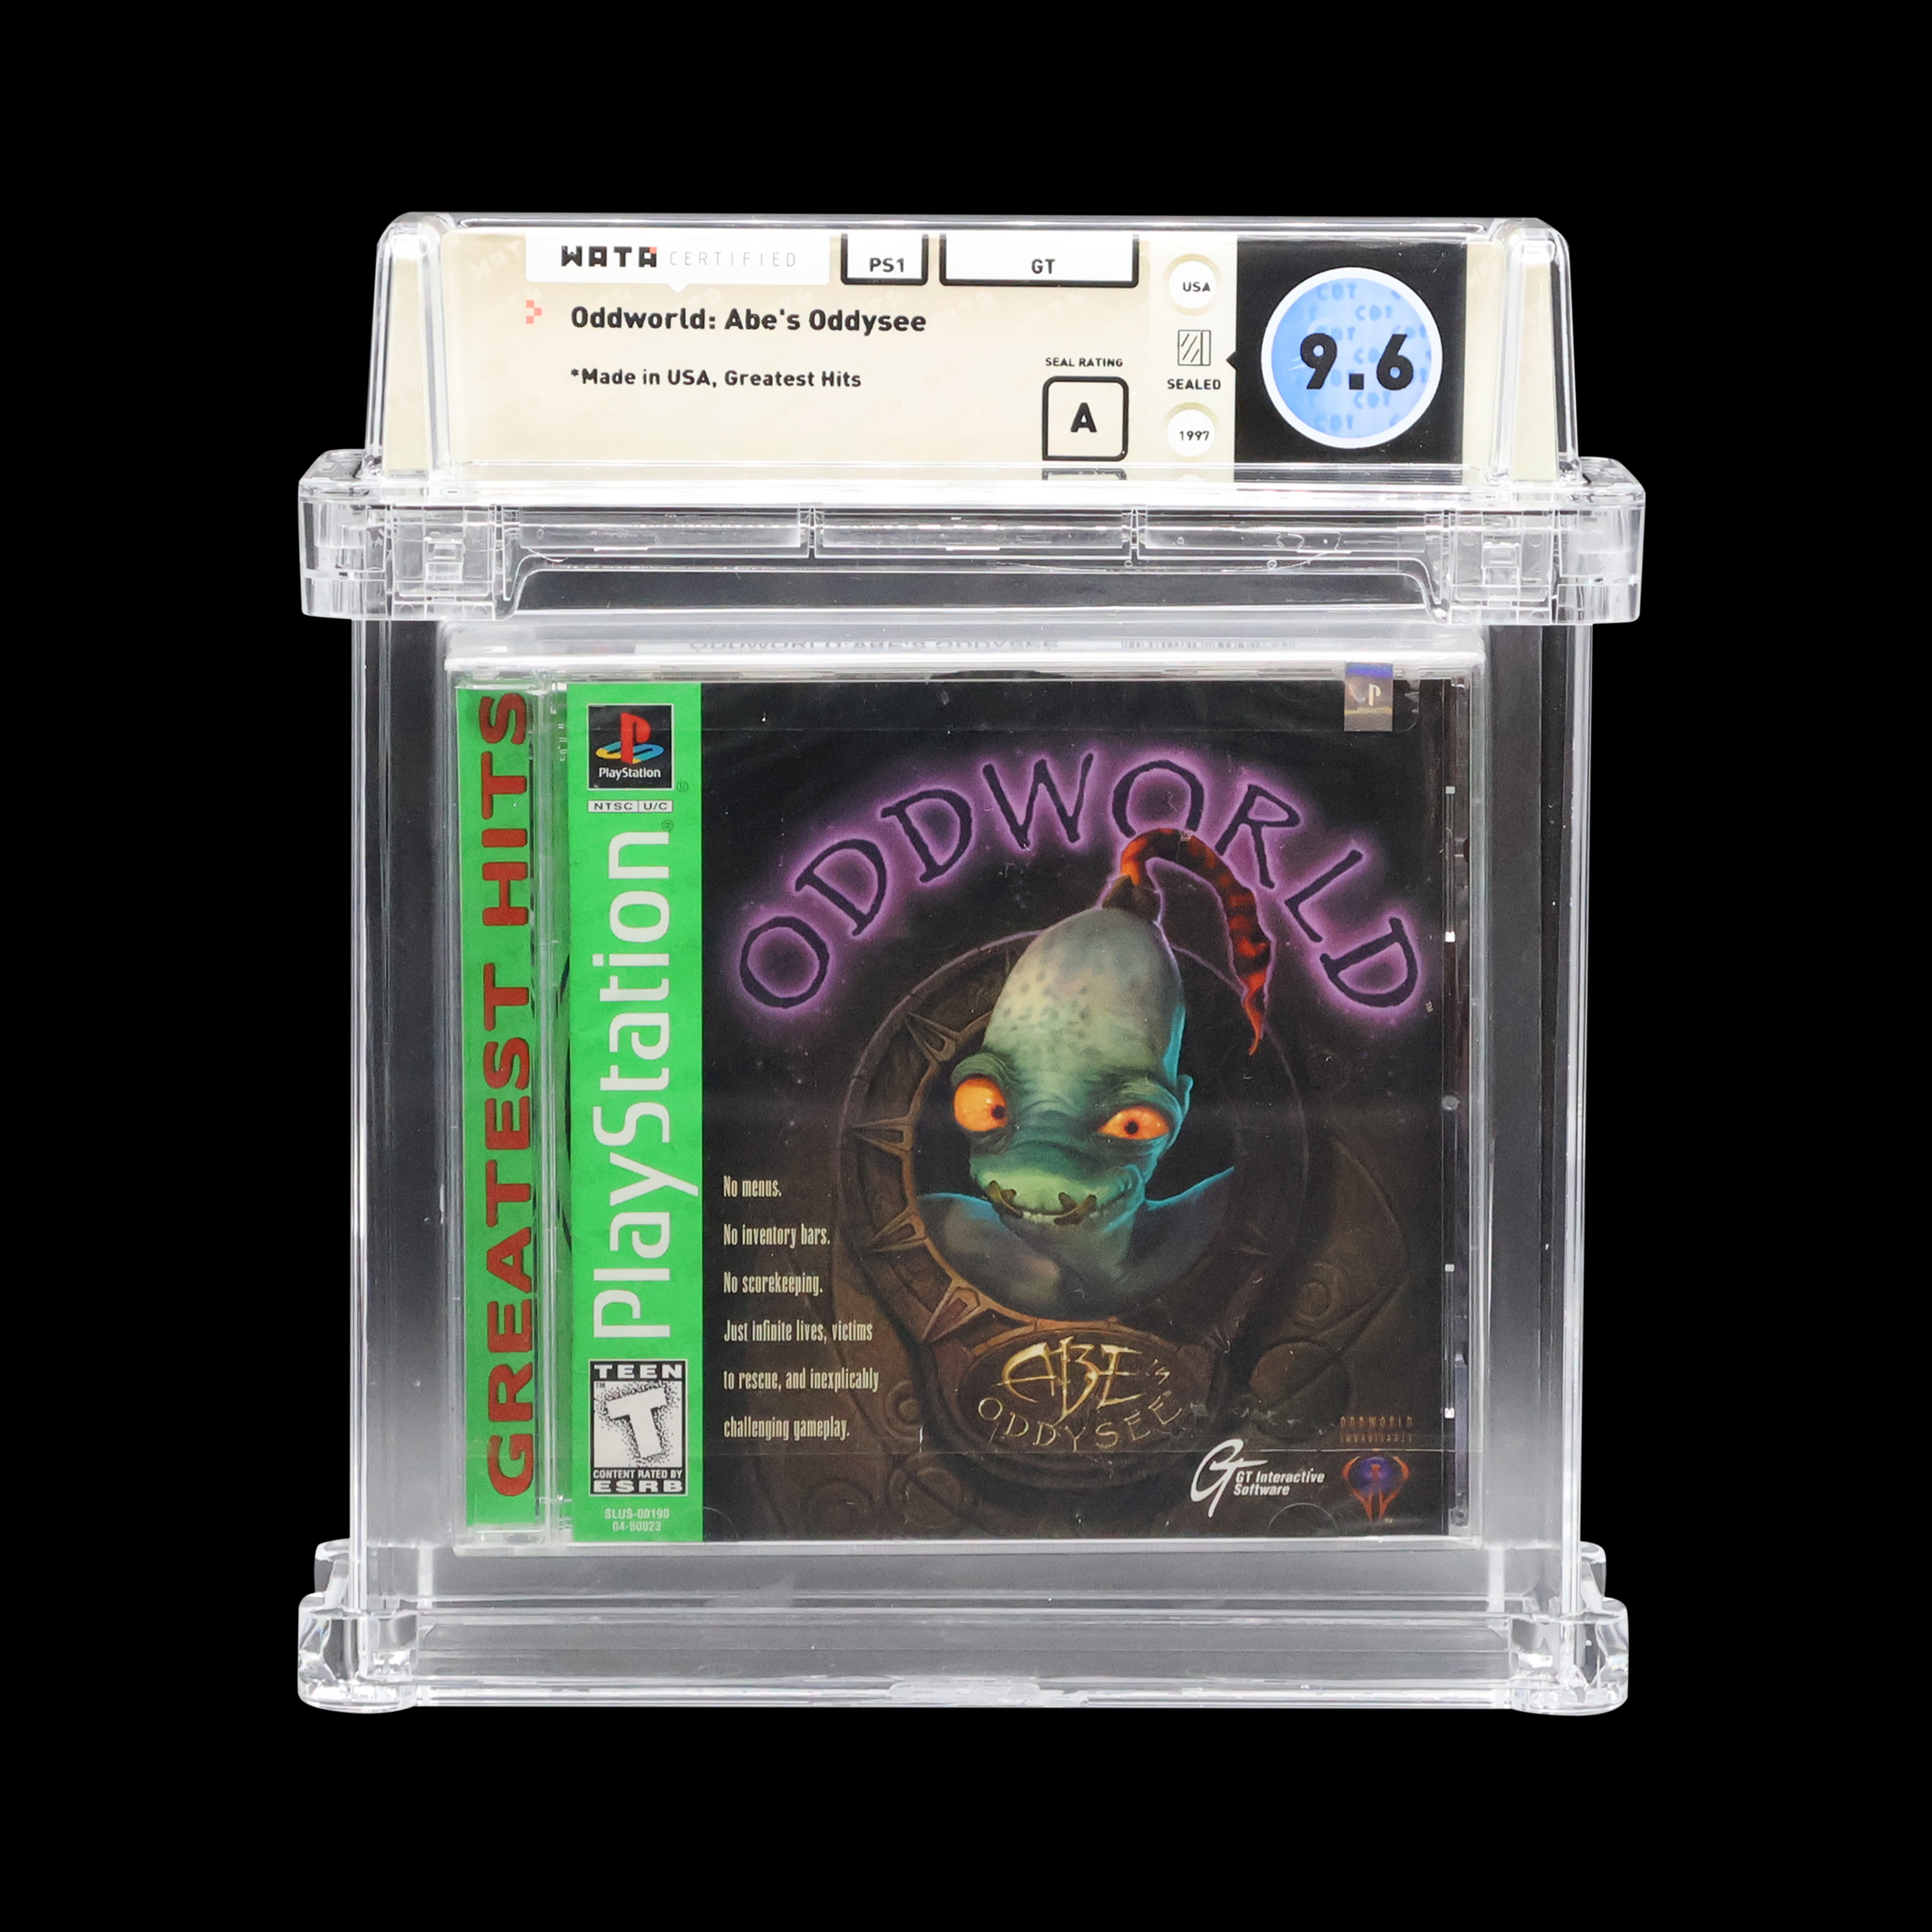 Collectible Oddworld: Abes Oddysee PlayStation game in WATA graded 9.6 sealed case.